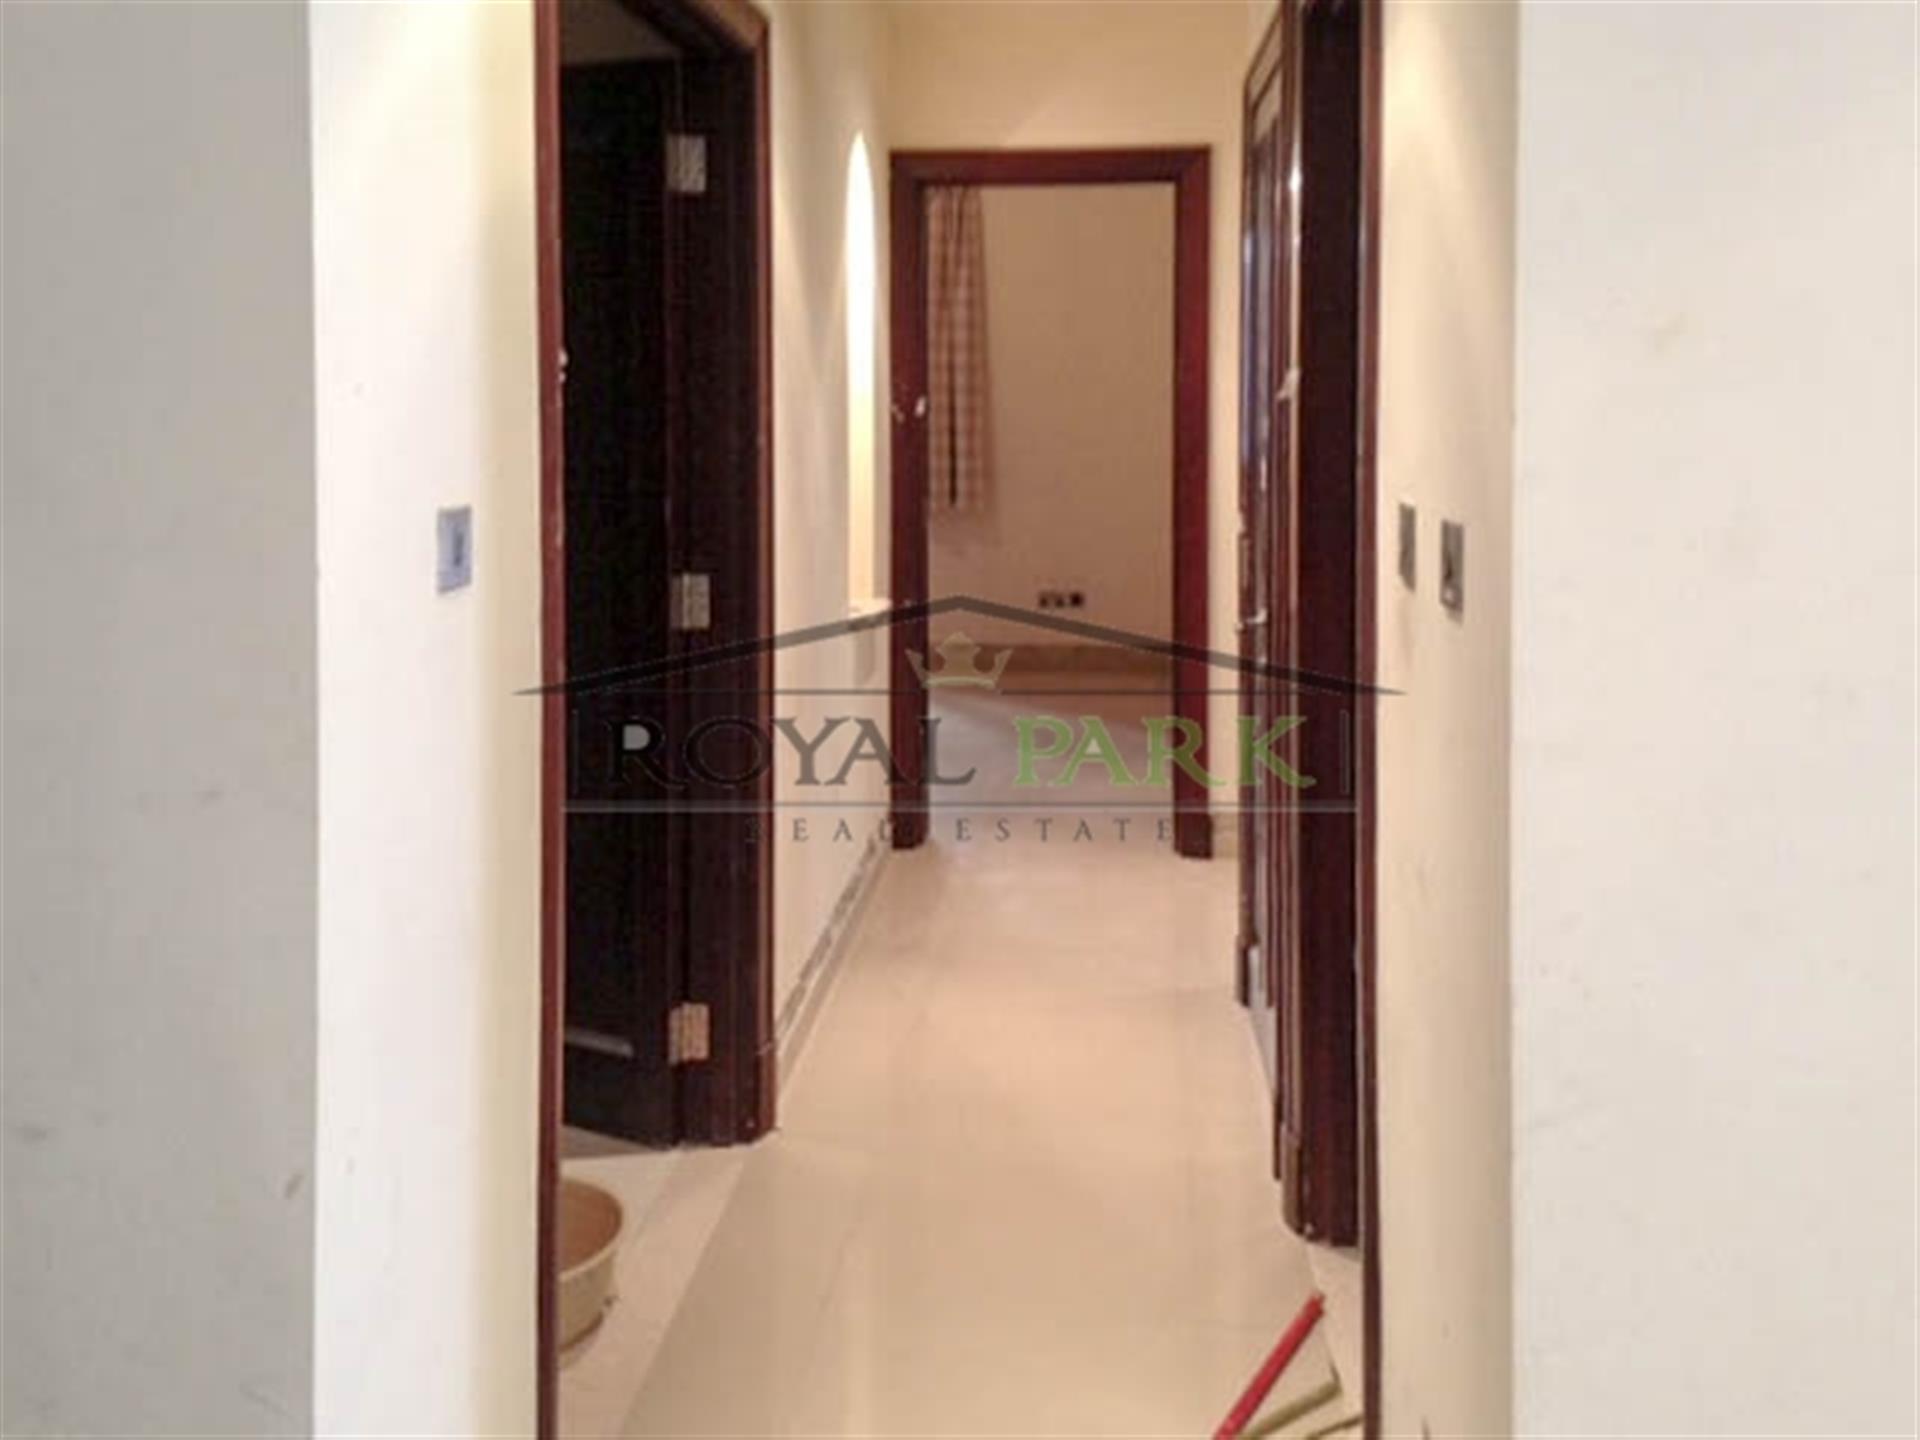 Old Town, Yansoon, 2 Bedroom, 1238 Sq.ft.